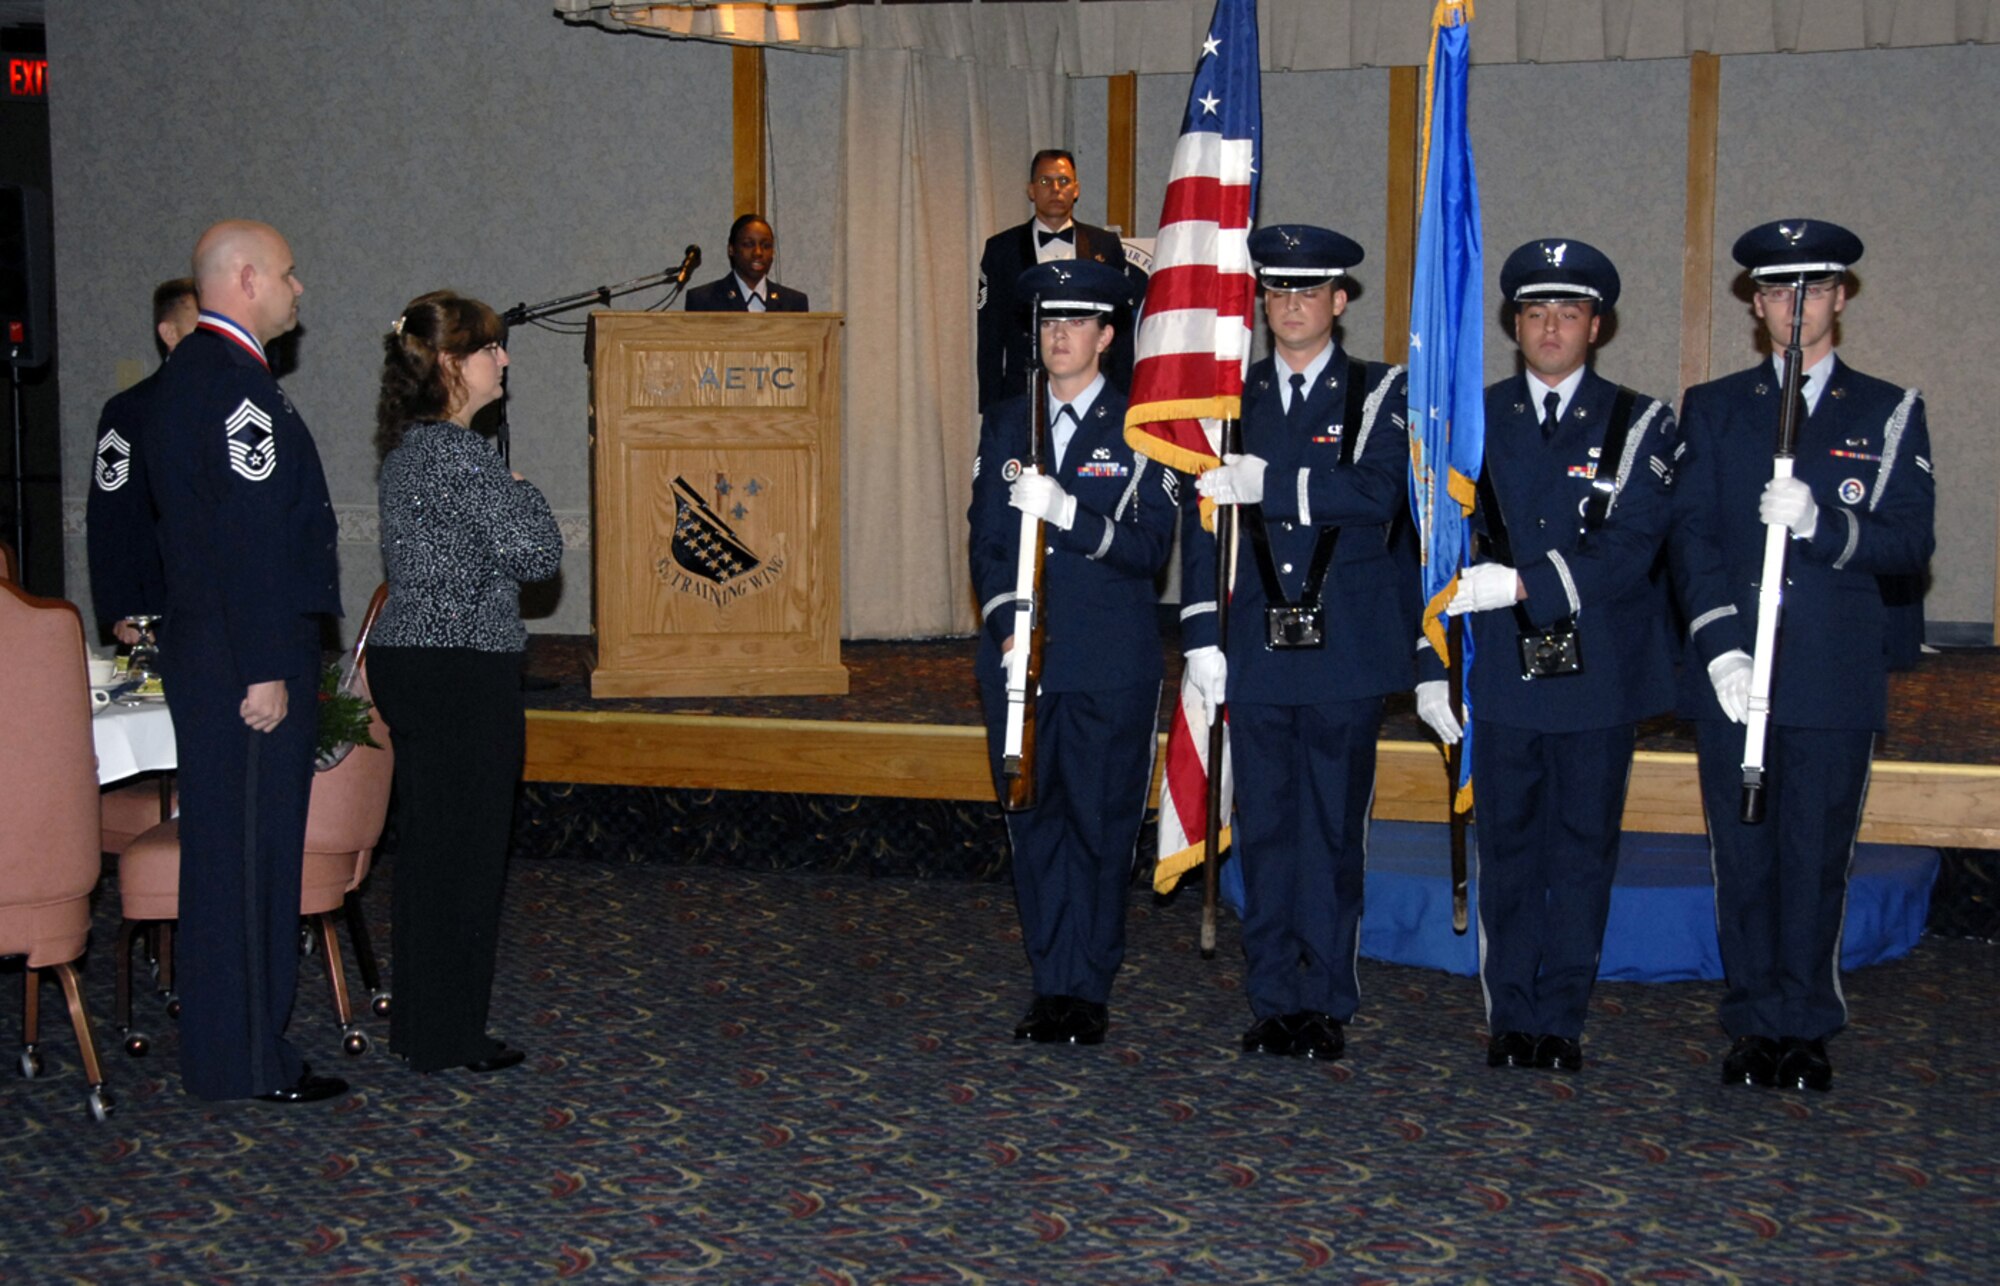 Members of the Sheppard Air Force Base honor guard present the colors during the singing of the national anthem  April 13 at the Chief Master Sergeant Recognition Ceremony, held at the Sheppard Club. (U.S. Air Force photo/Sandy Wassenmiller)